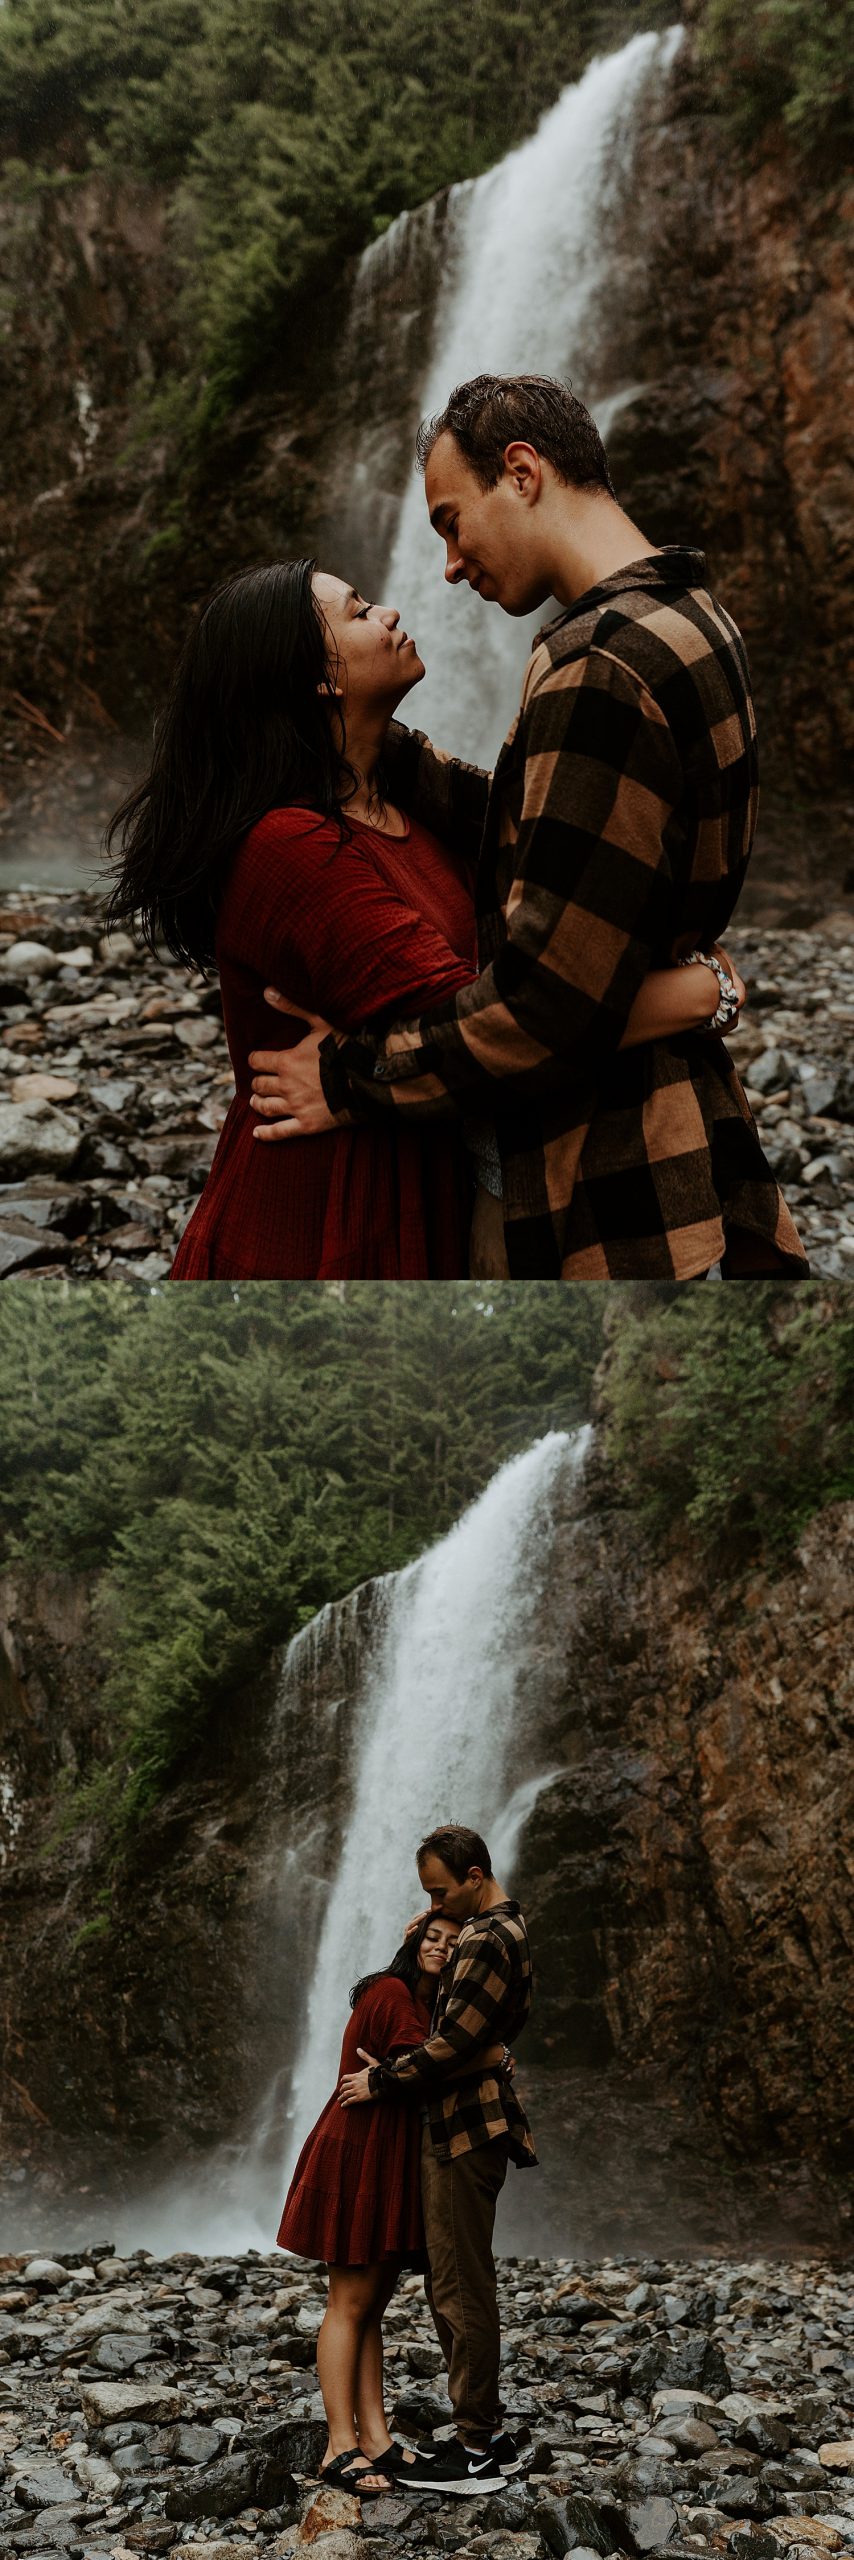 Couple embracing in front of a large waterfall